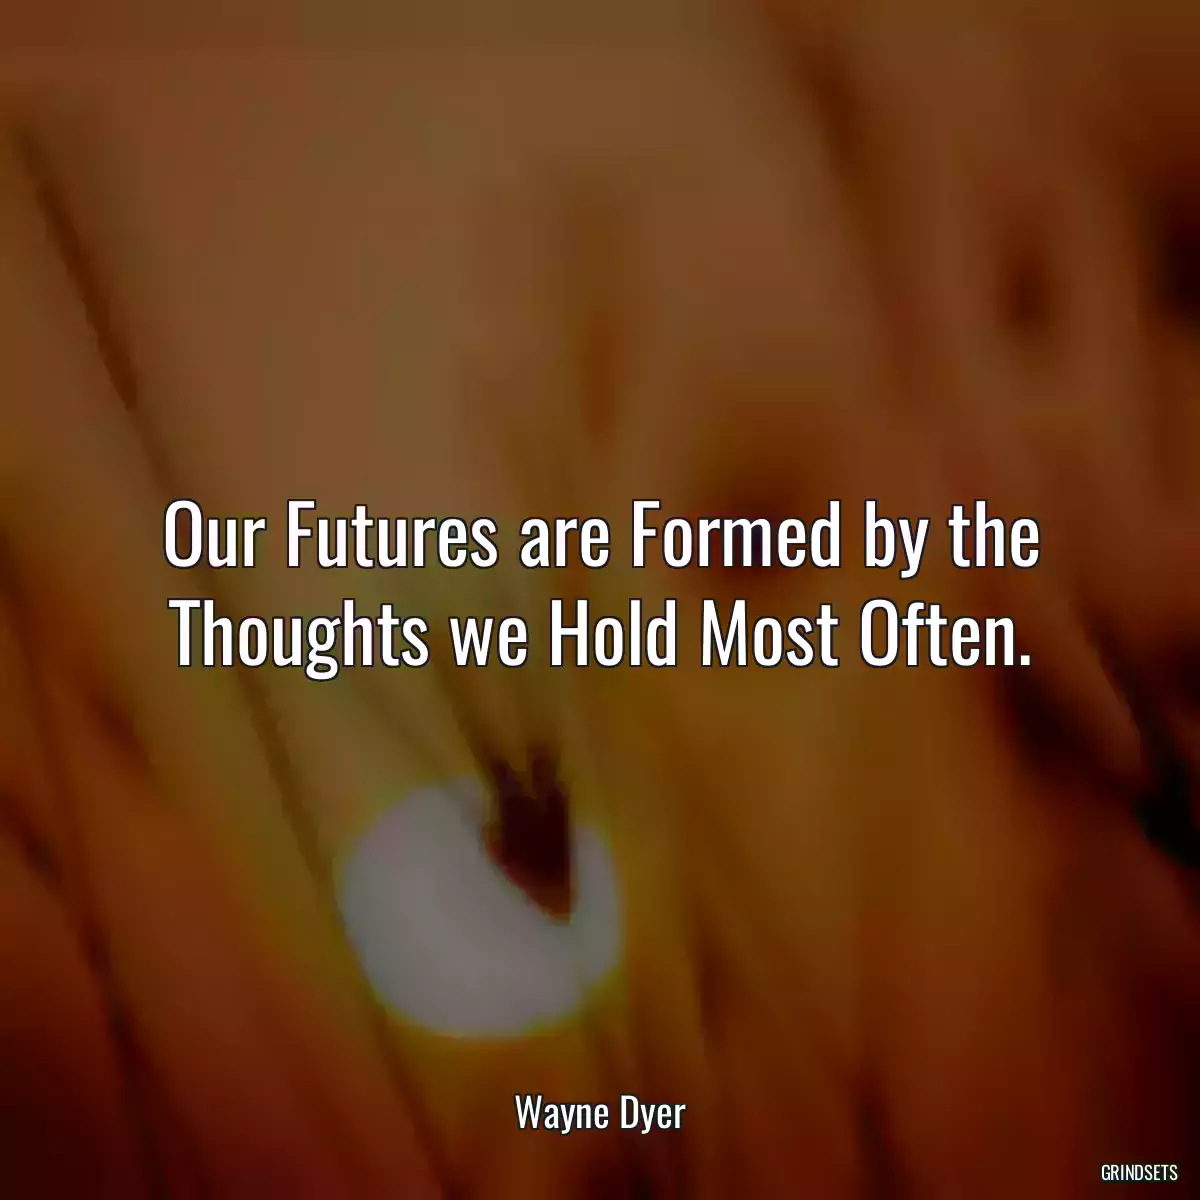 Our Futures are Formed by the Thoughts we Hold Most Often.